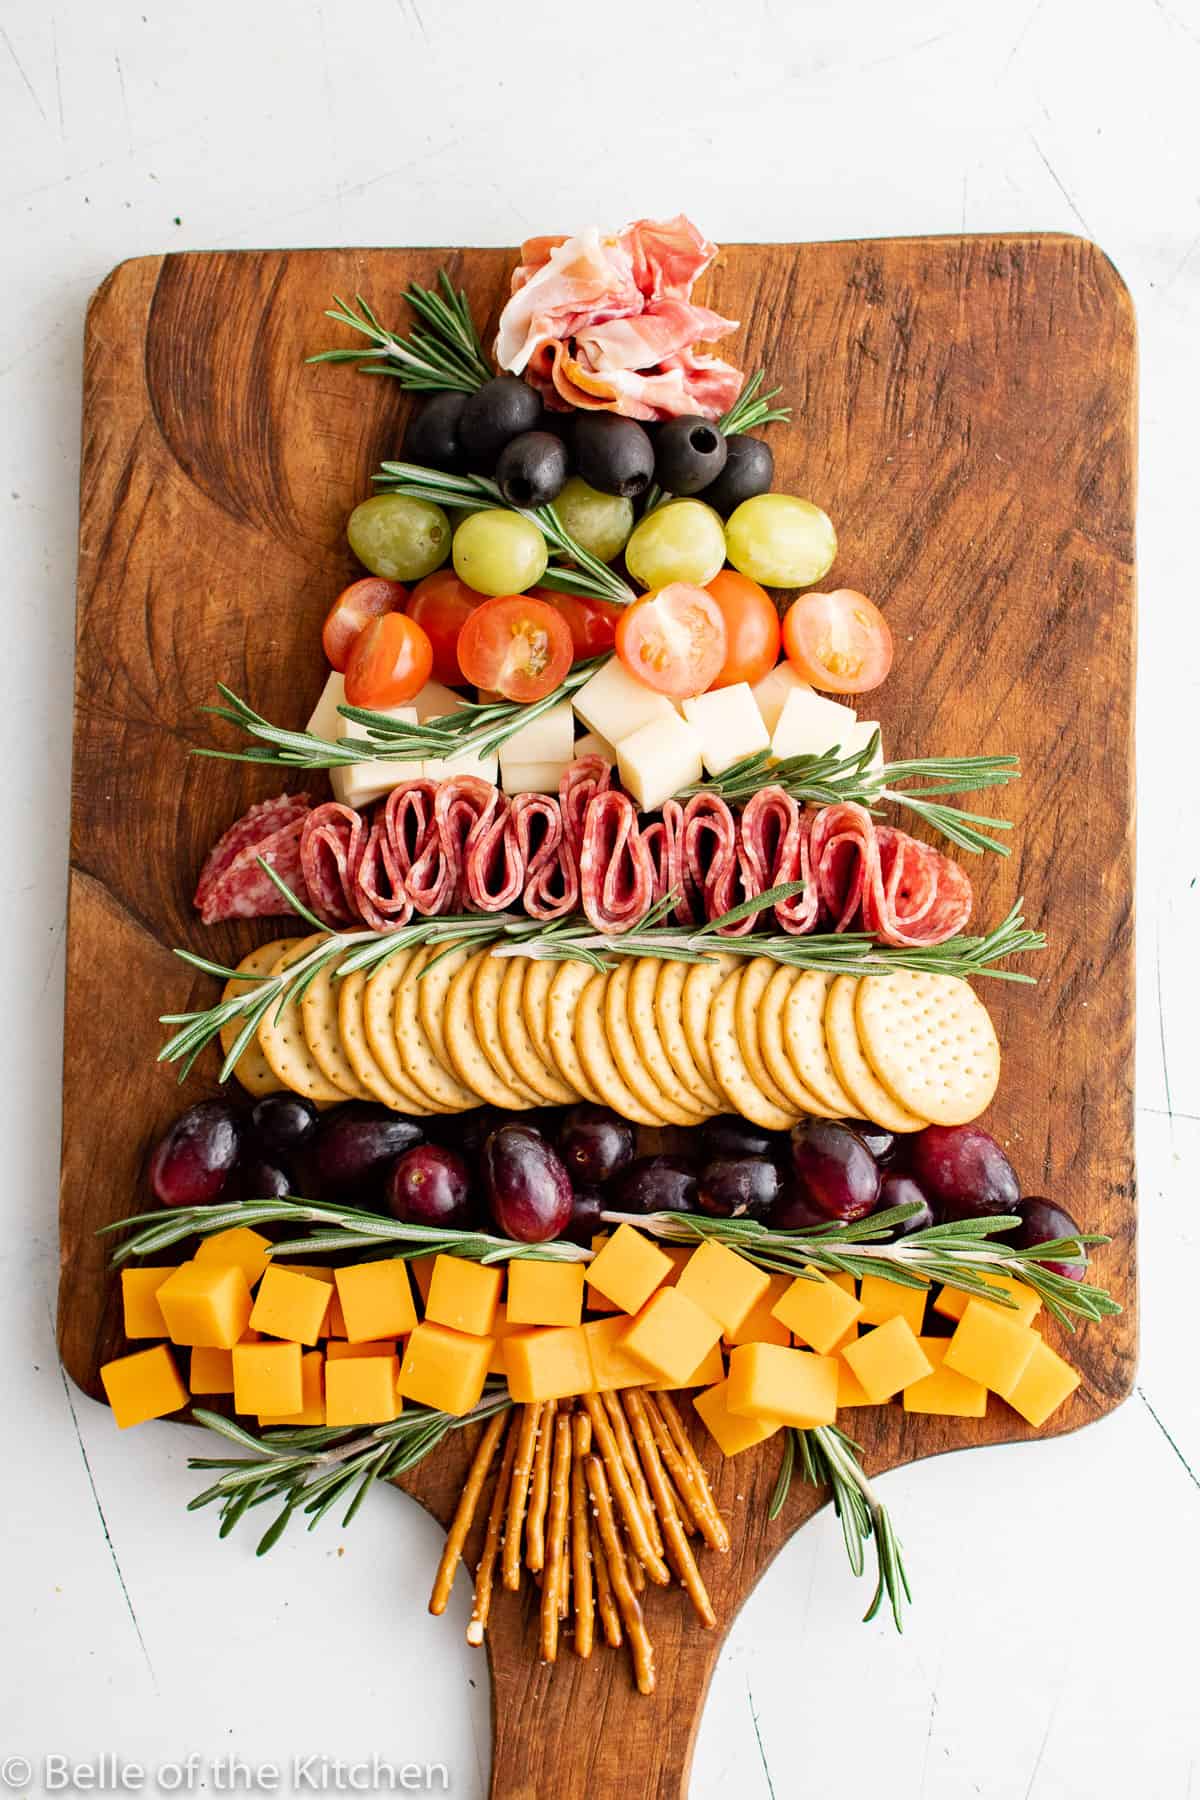 cut up cheese cubes, grapes, crackers, tomatoes, olives, prosciutto, and salami on a wooden cutting board in the shape of a Christmas tree.